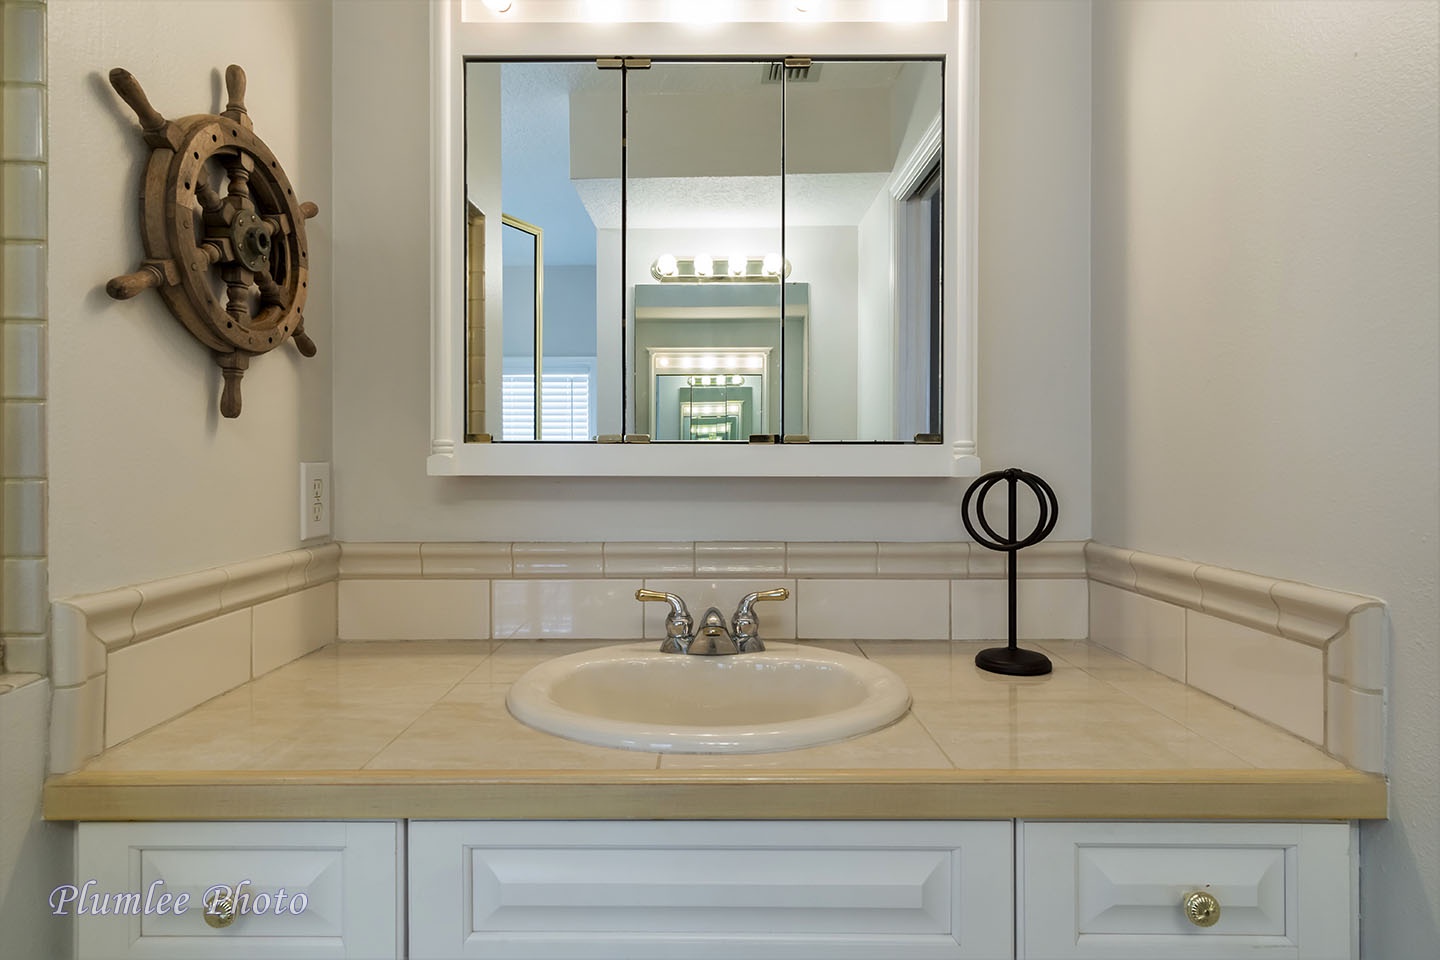 The vanity area in the first floor family bathroom.